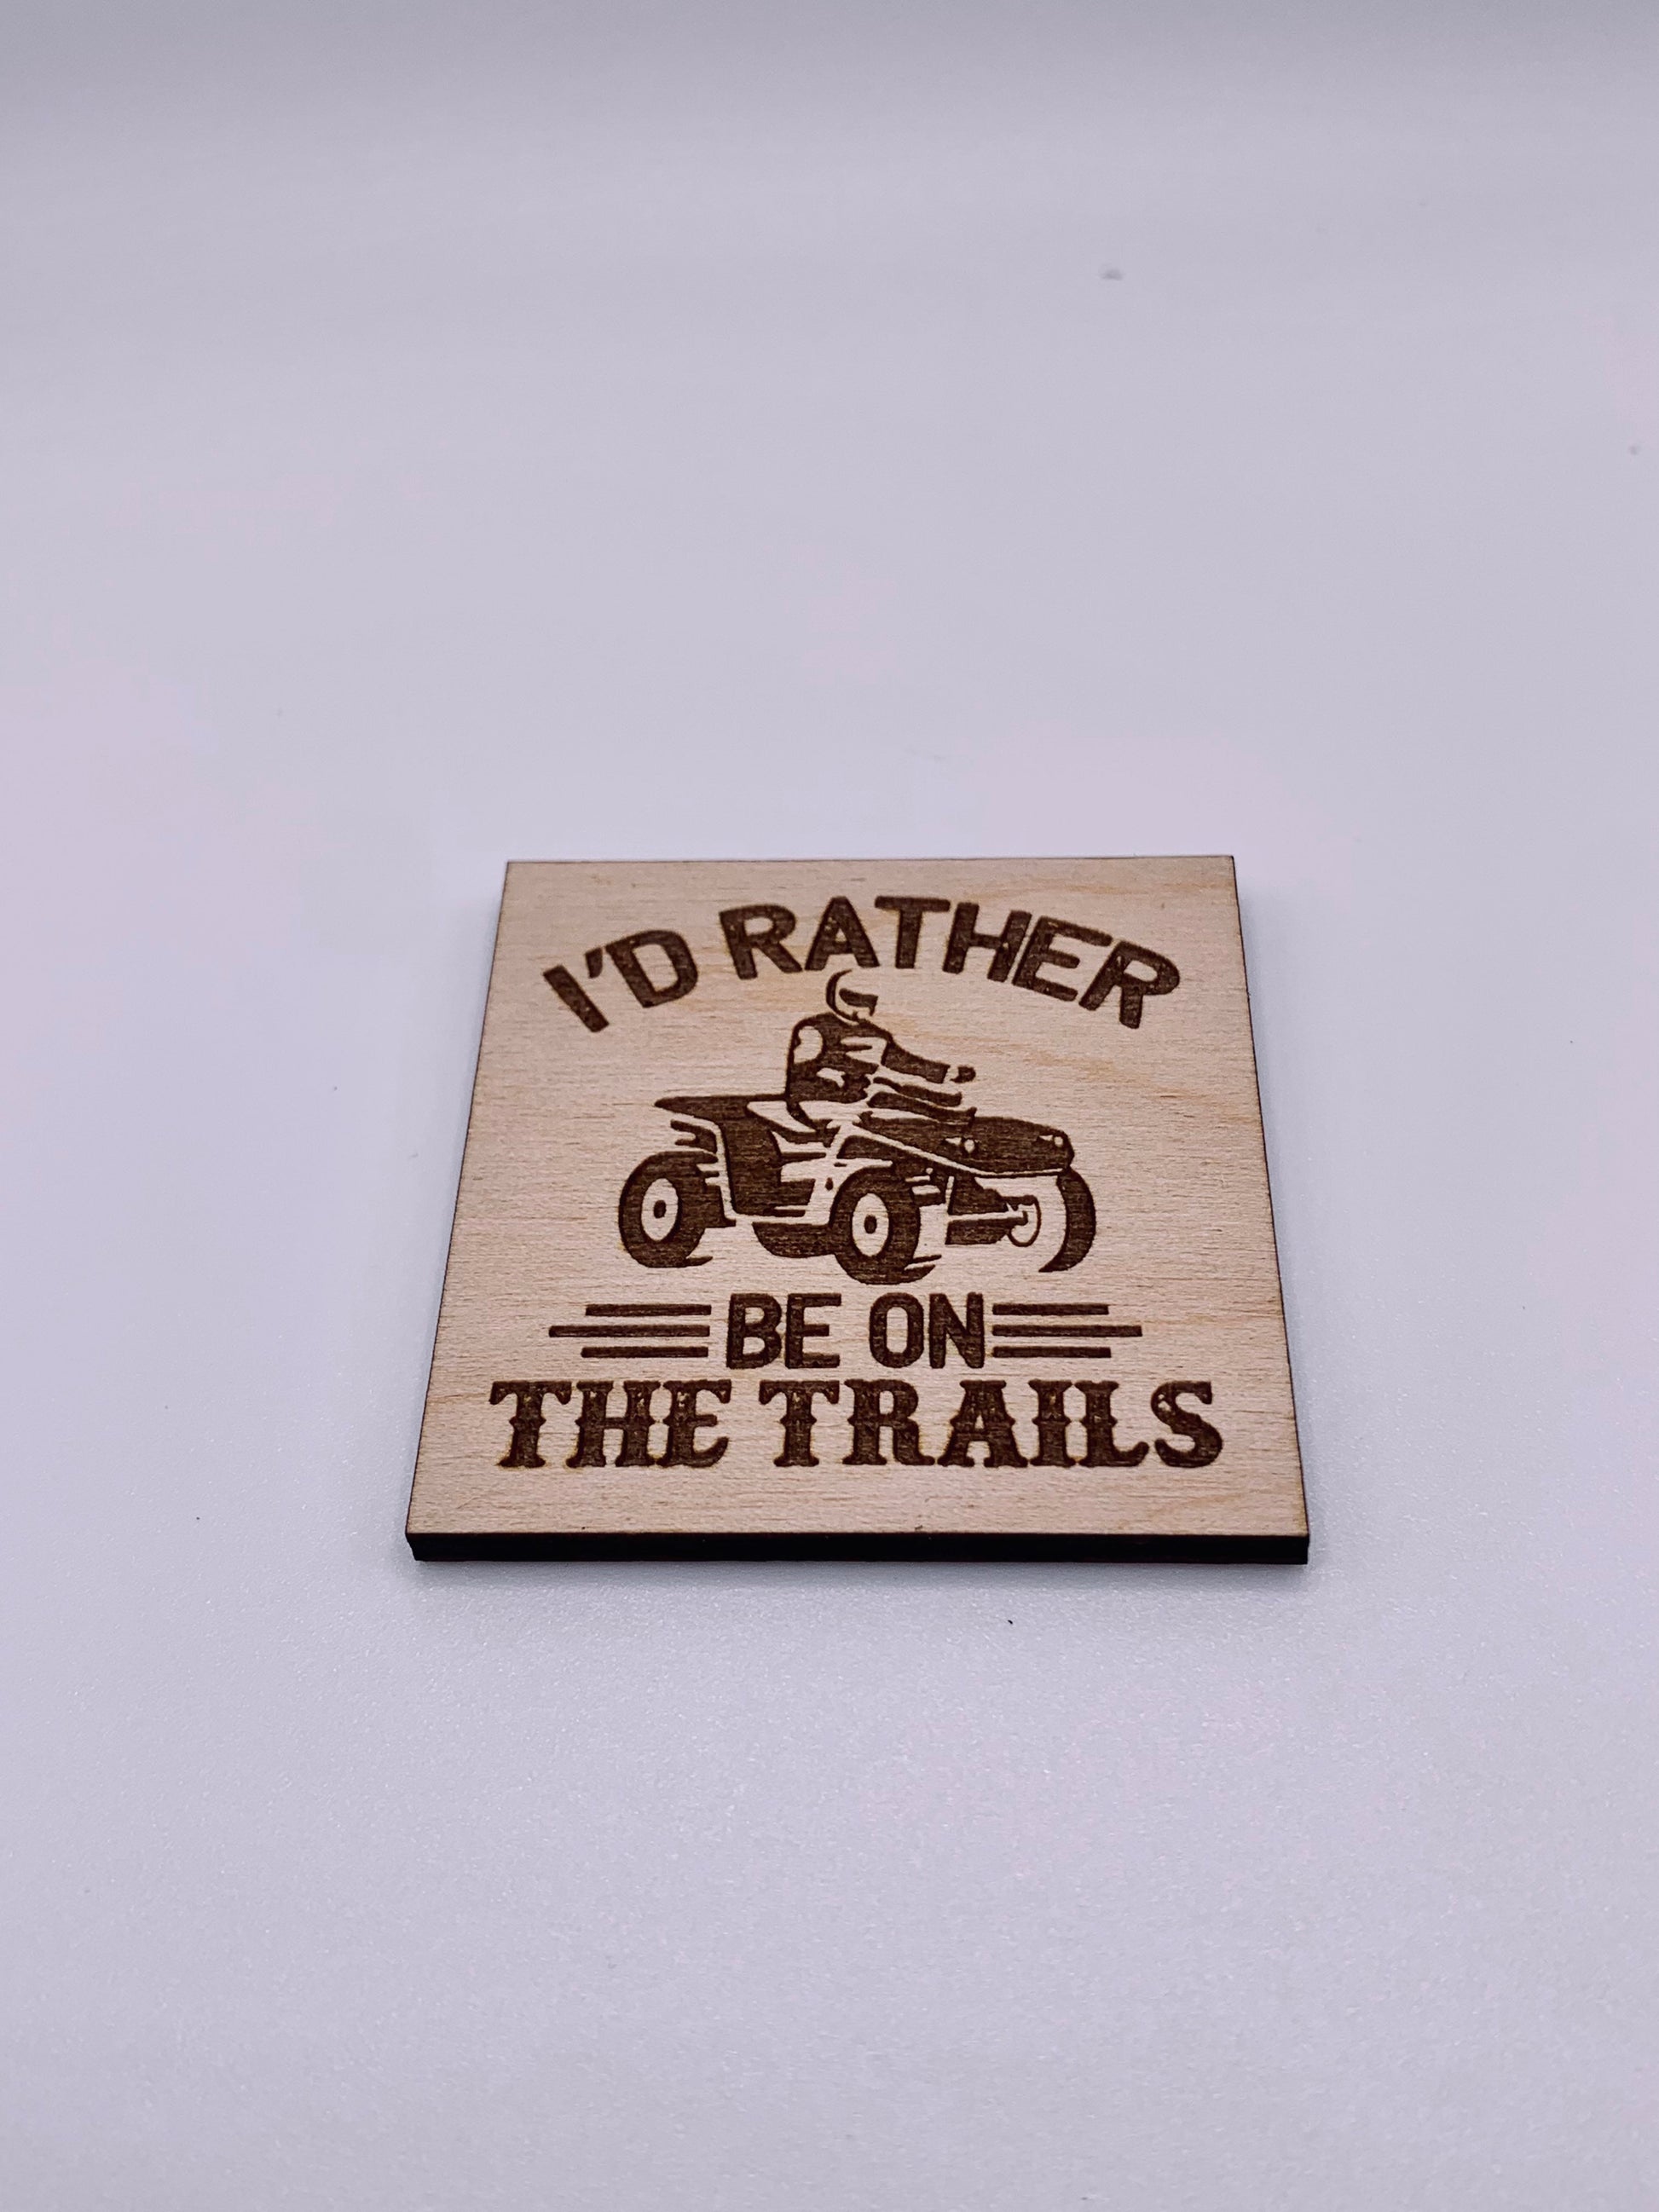 I'd rather be on the trails - Creative Designs By Kari